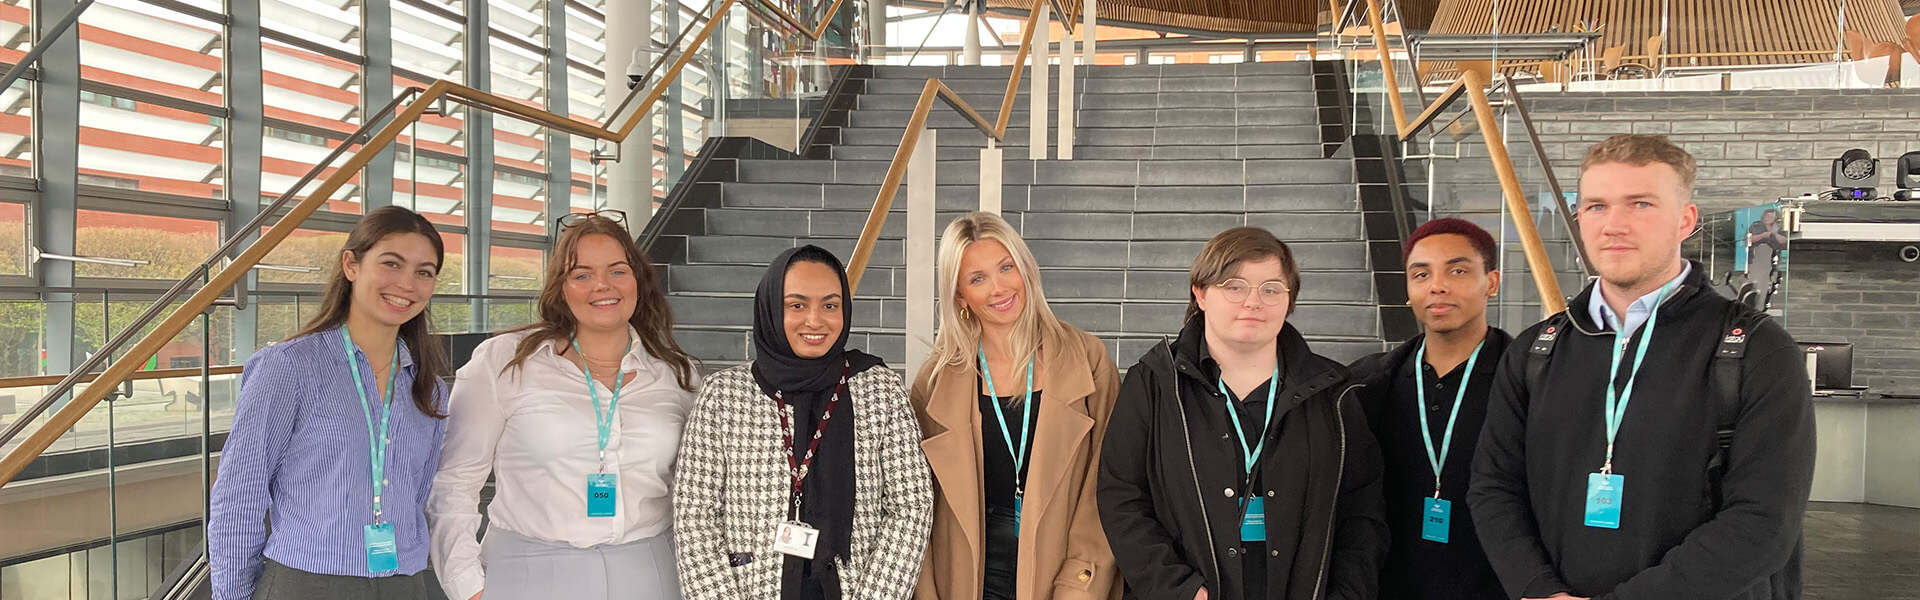 Welsh Government welcomes students to the Senedd as it supports Browne Jacobson’s FAIRE social mobility programme